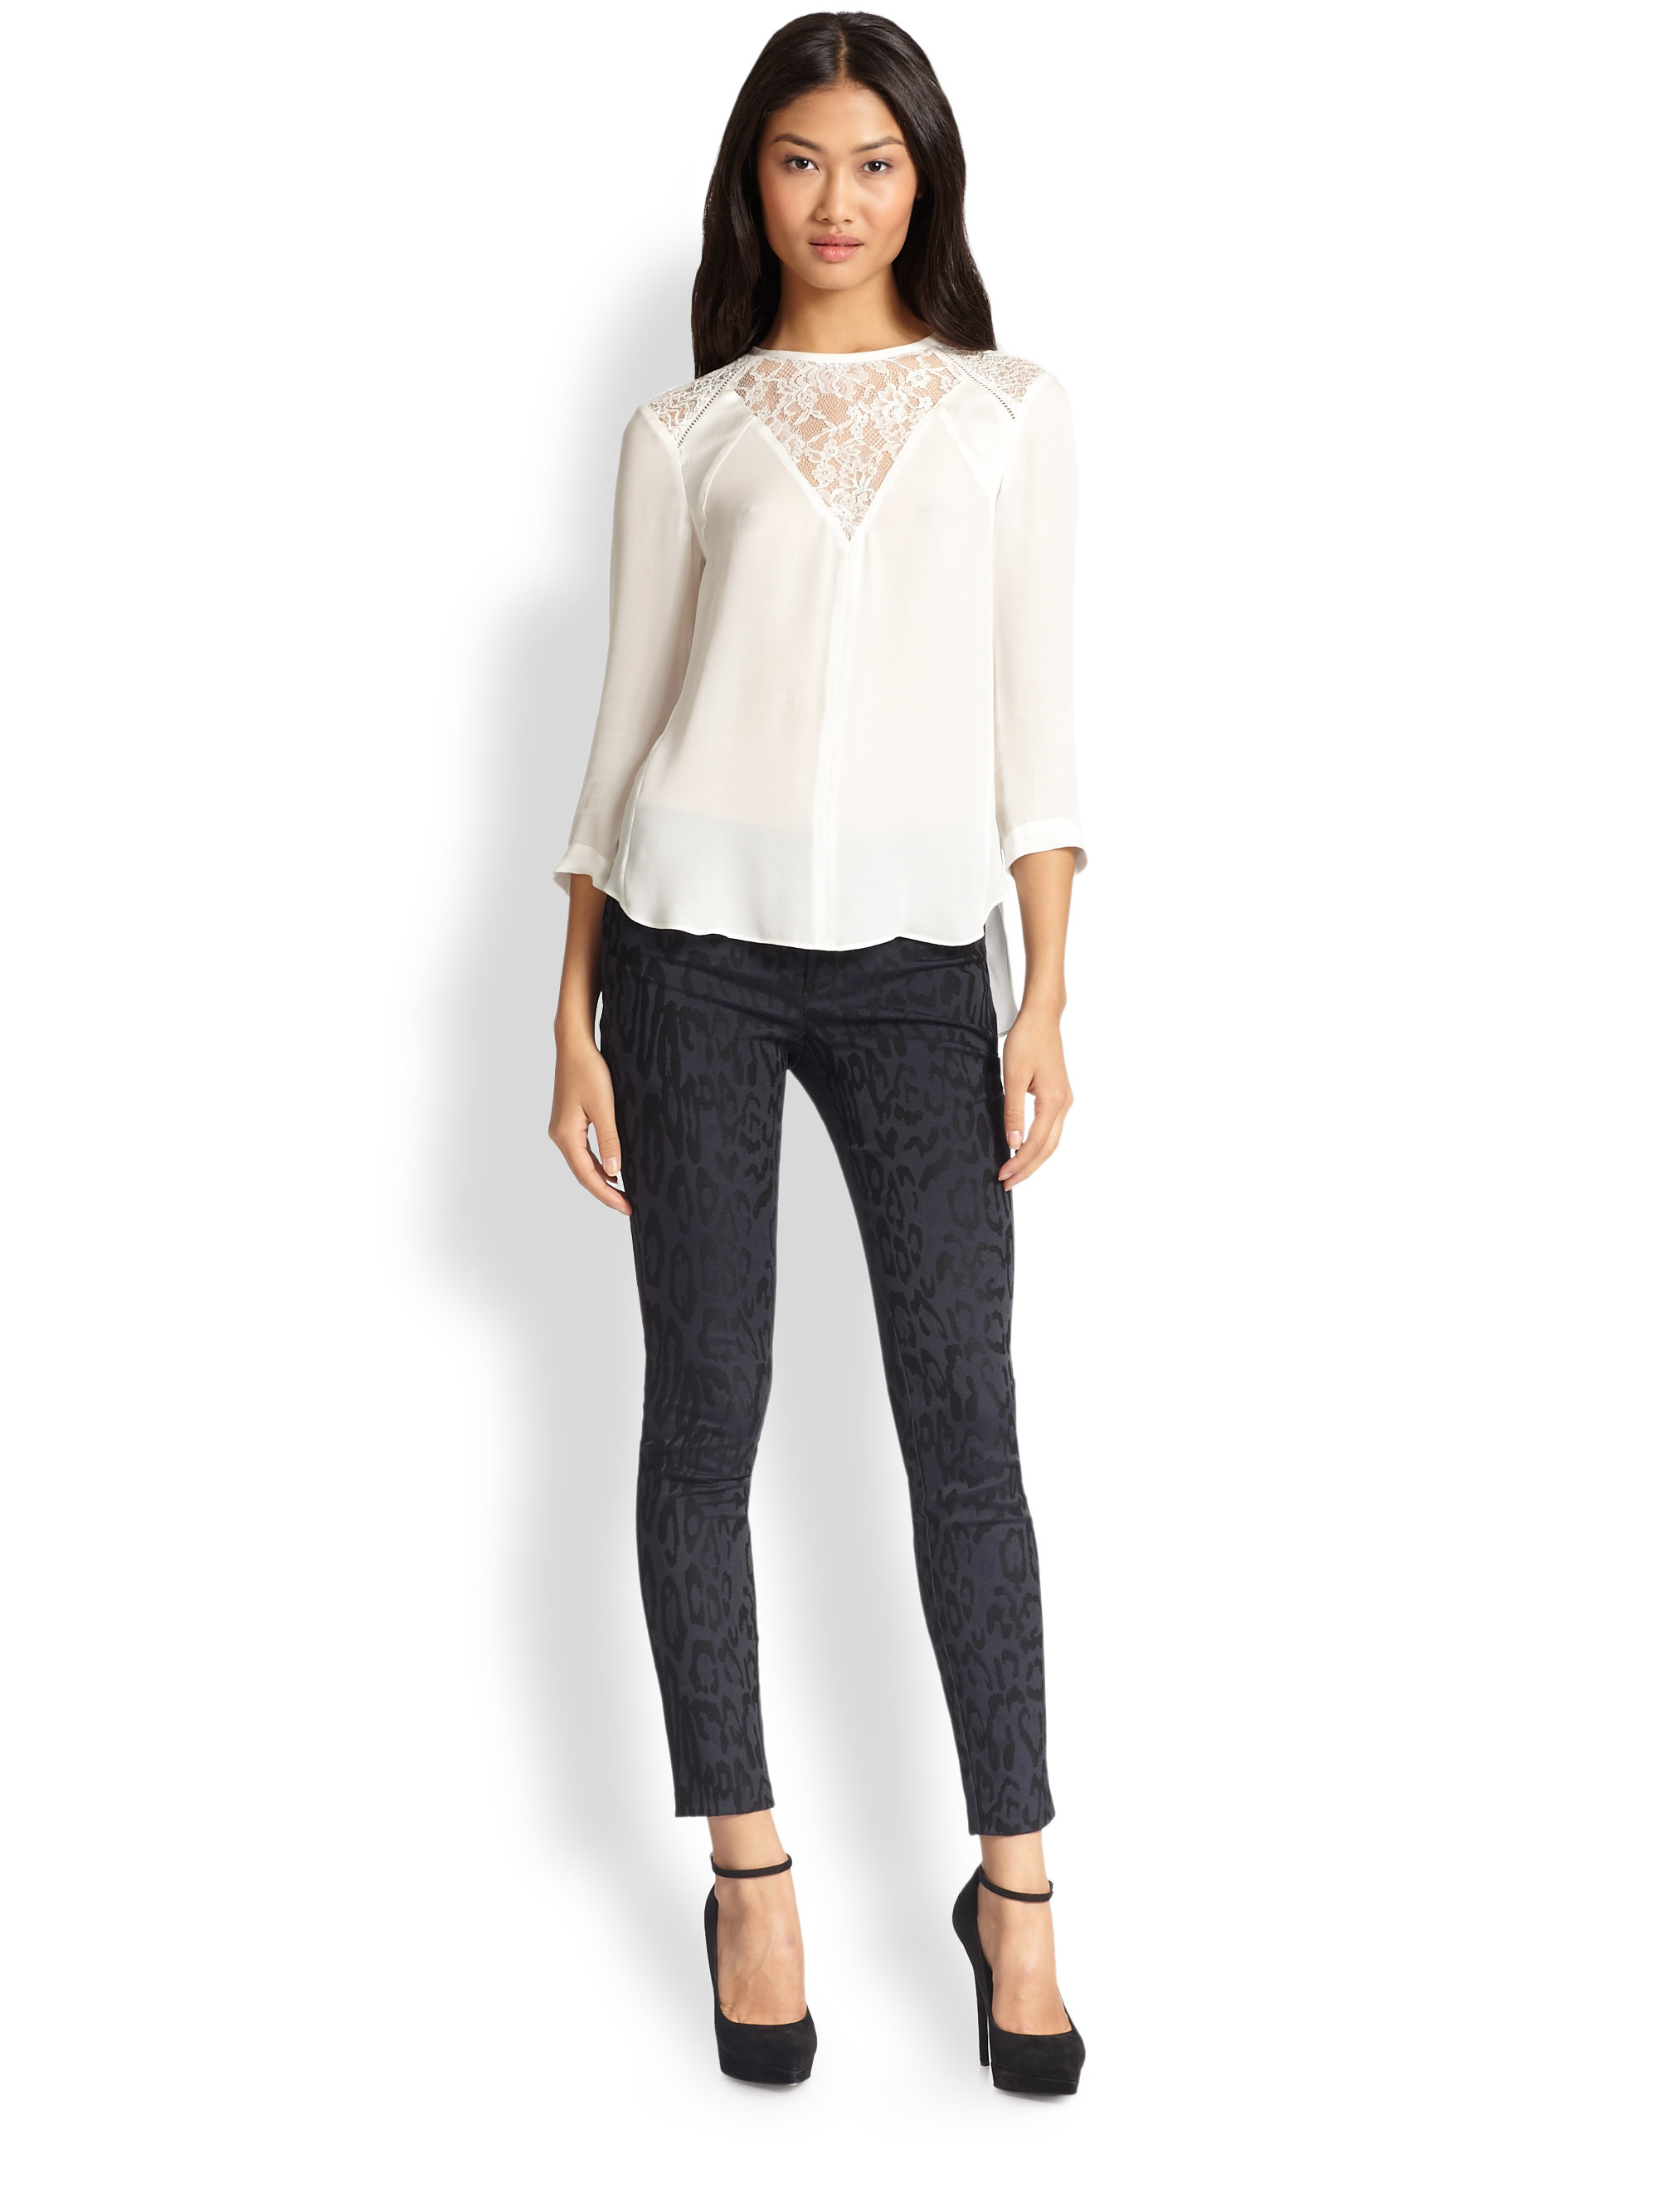 Lyst - Rebecca Taylor Lace-Paneled Silk Blouse in White